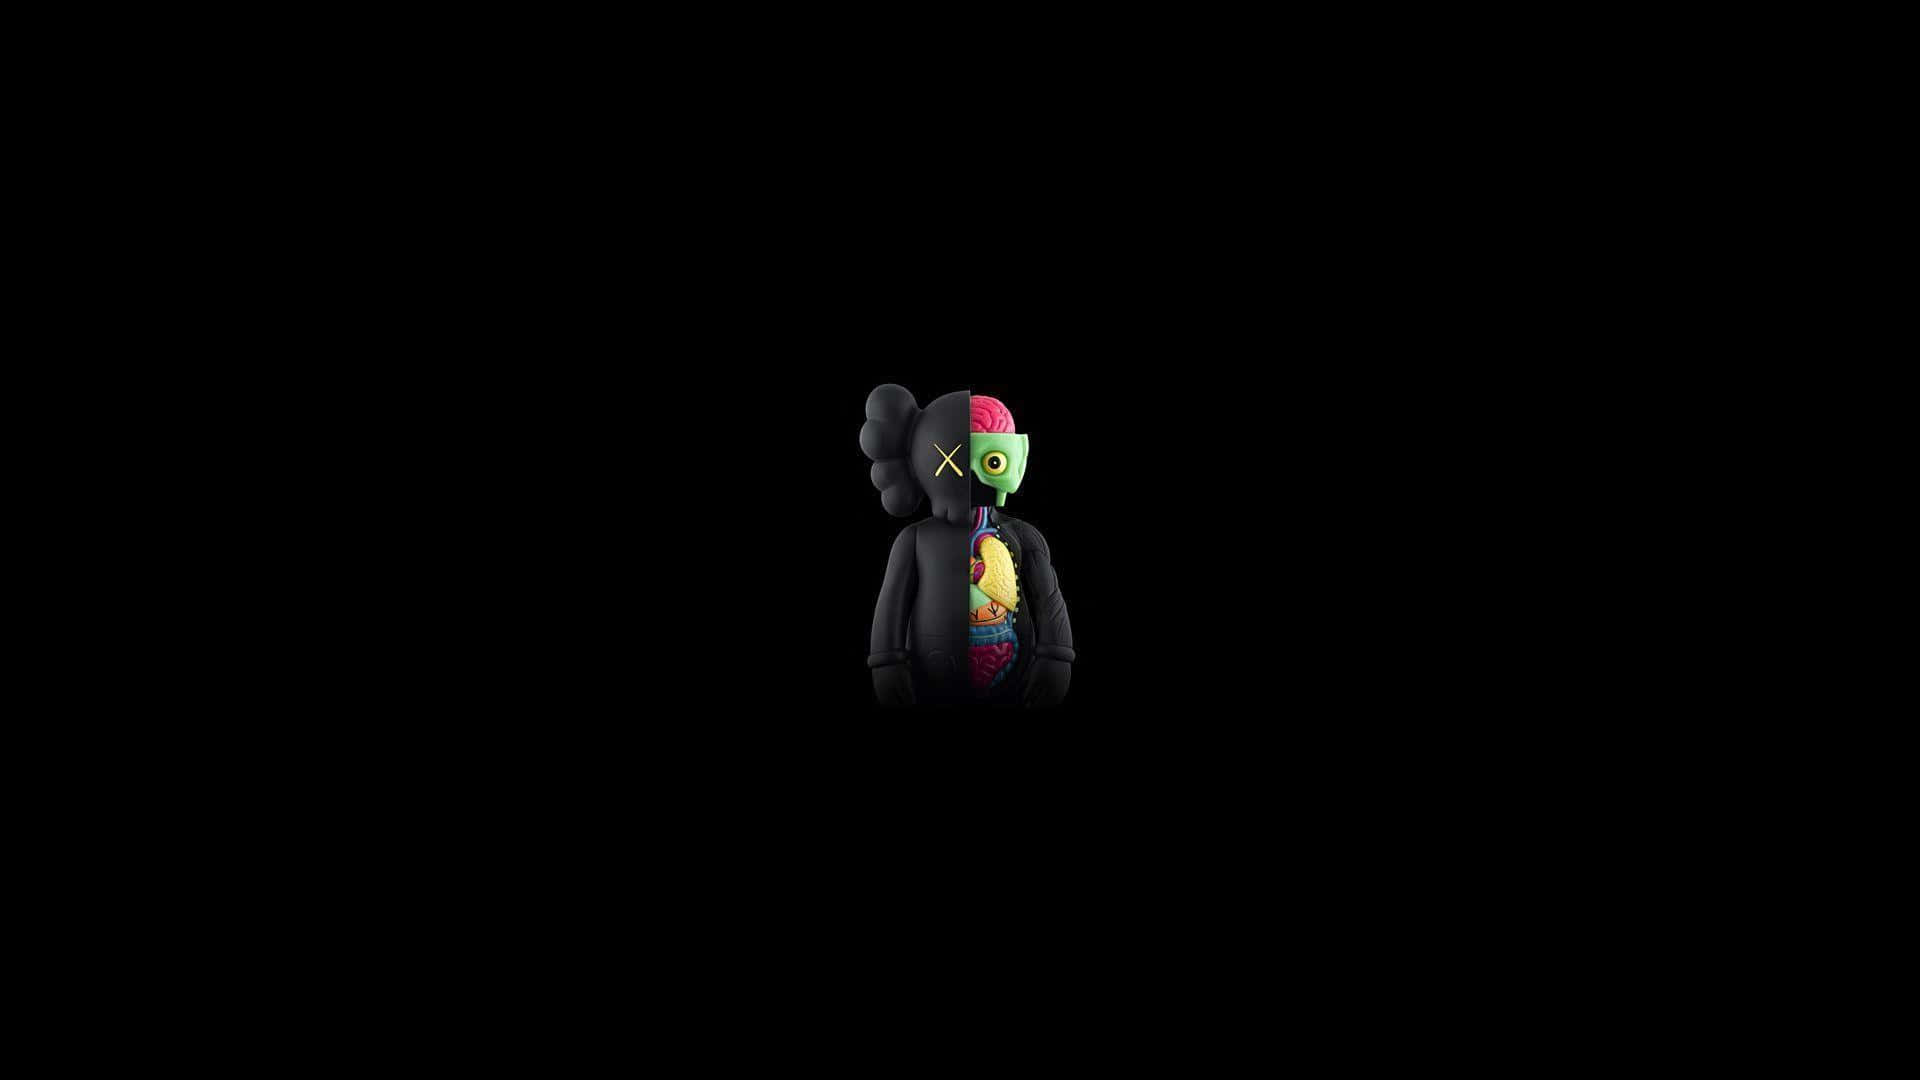 KAWS' iconic companion character adds a pop of artistic style